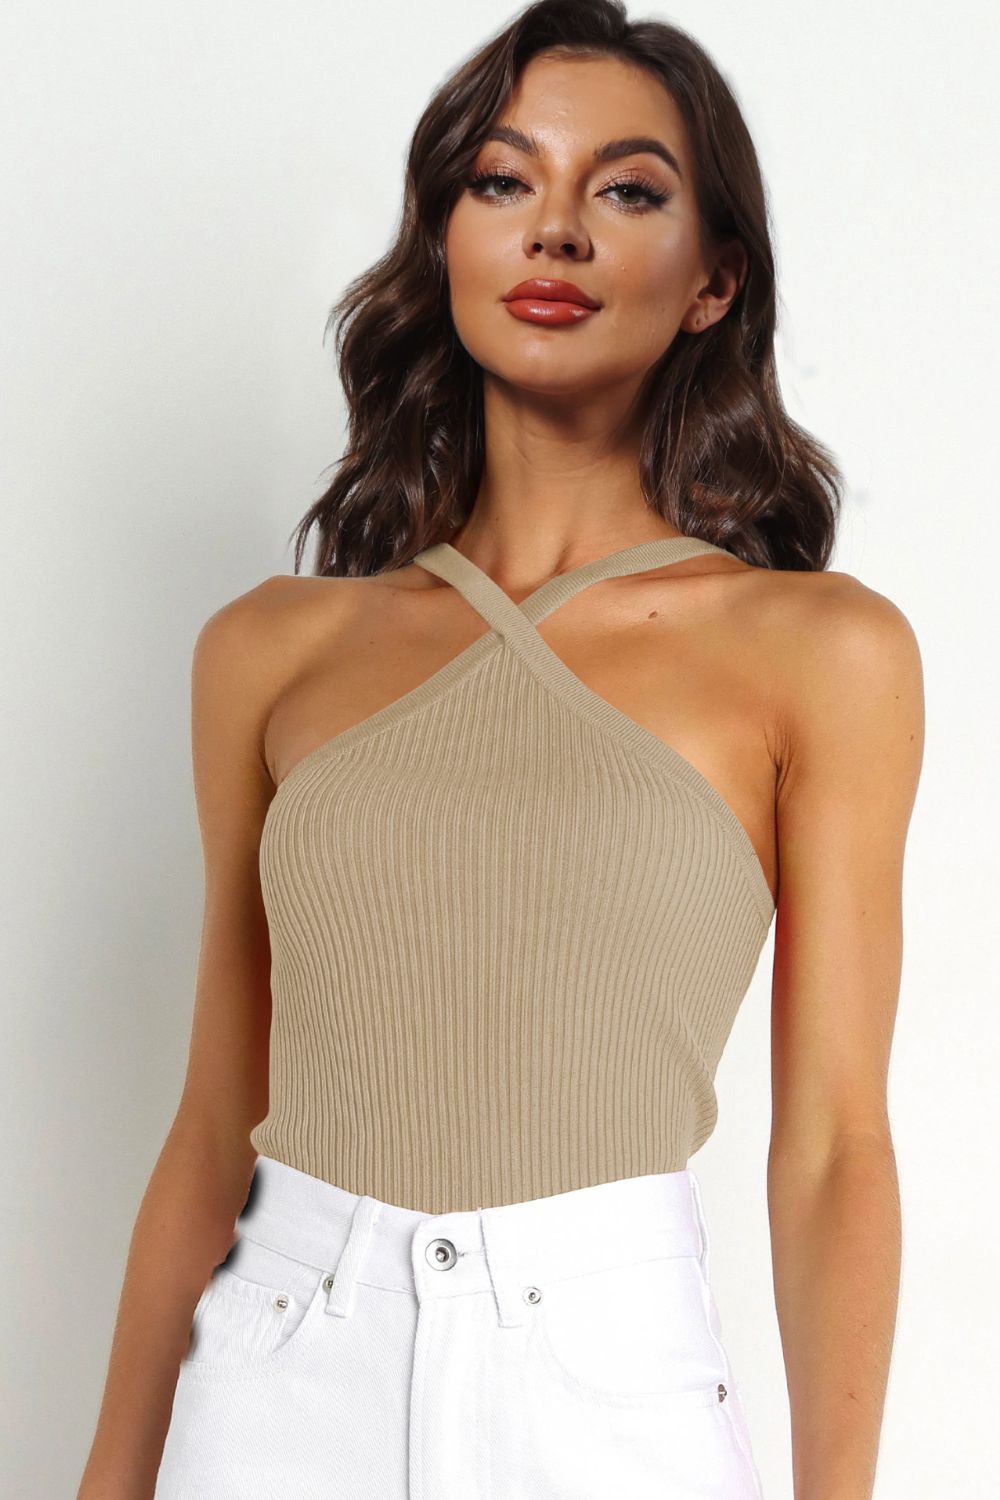 Ribbed Cami Top - Beige / S - Tops & Tees - Shirts & Tops - 7 - 2024